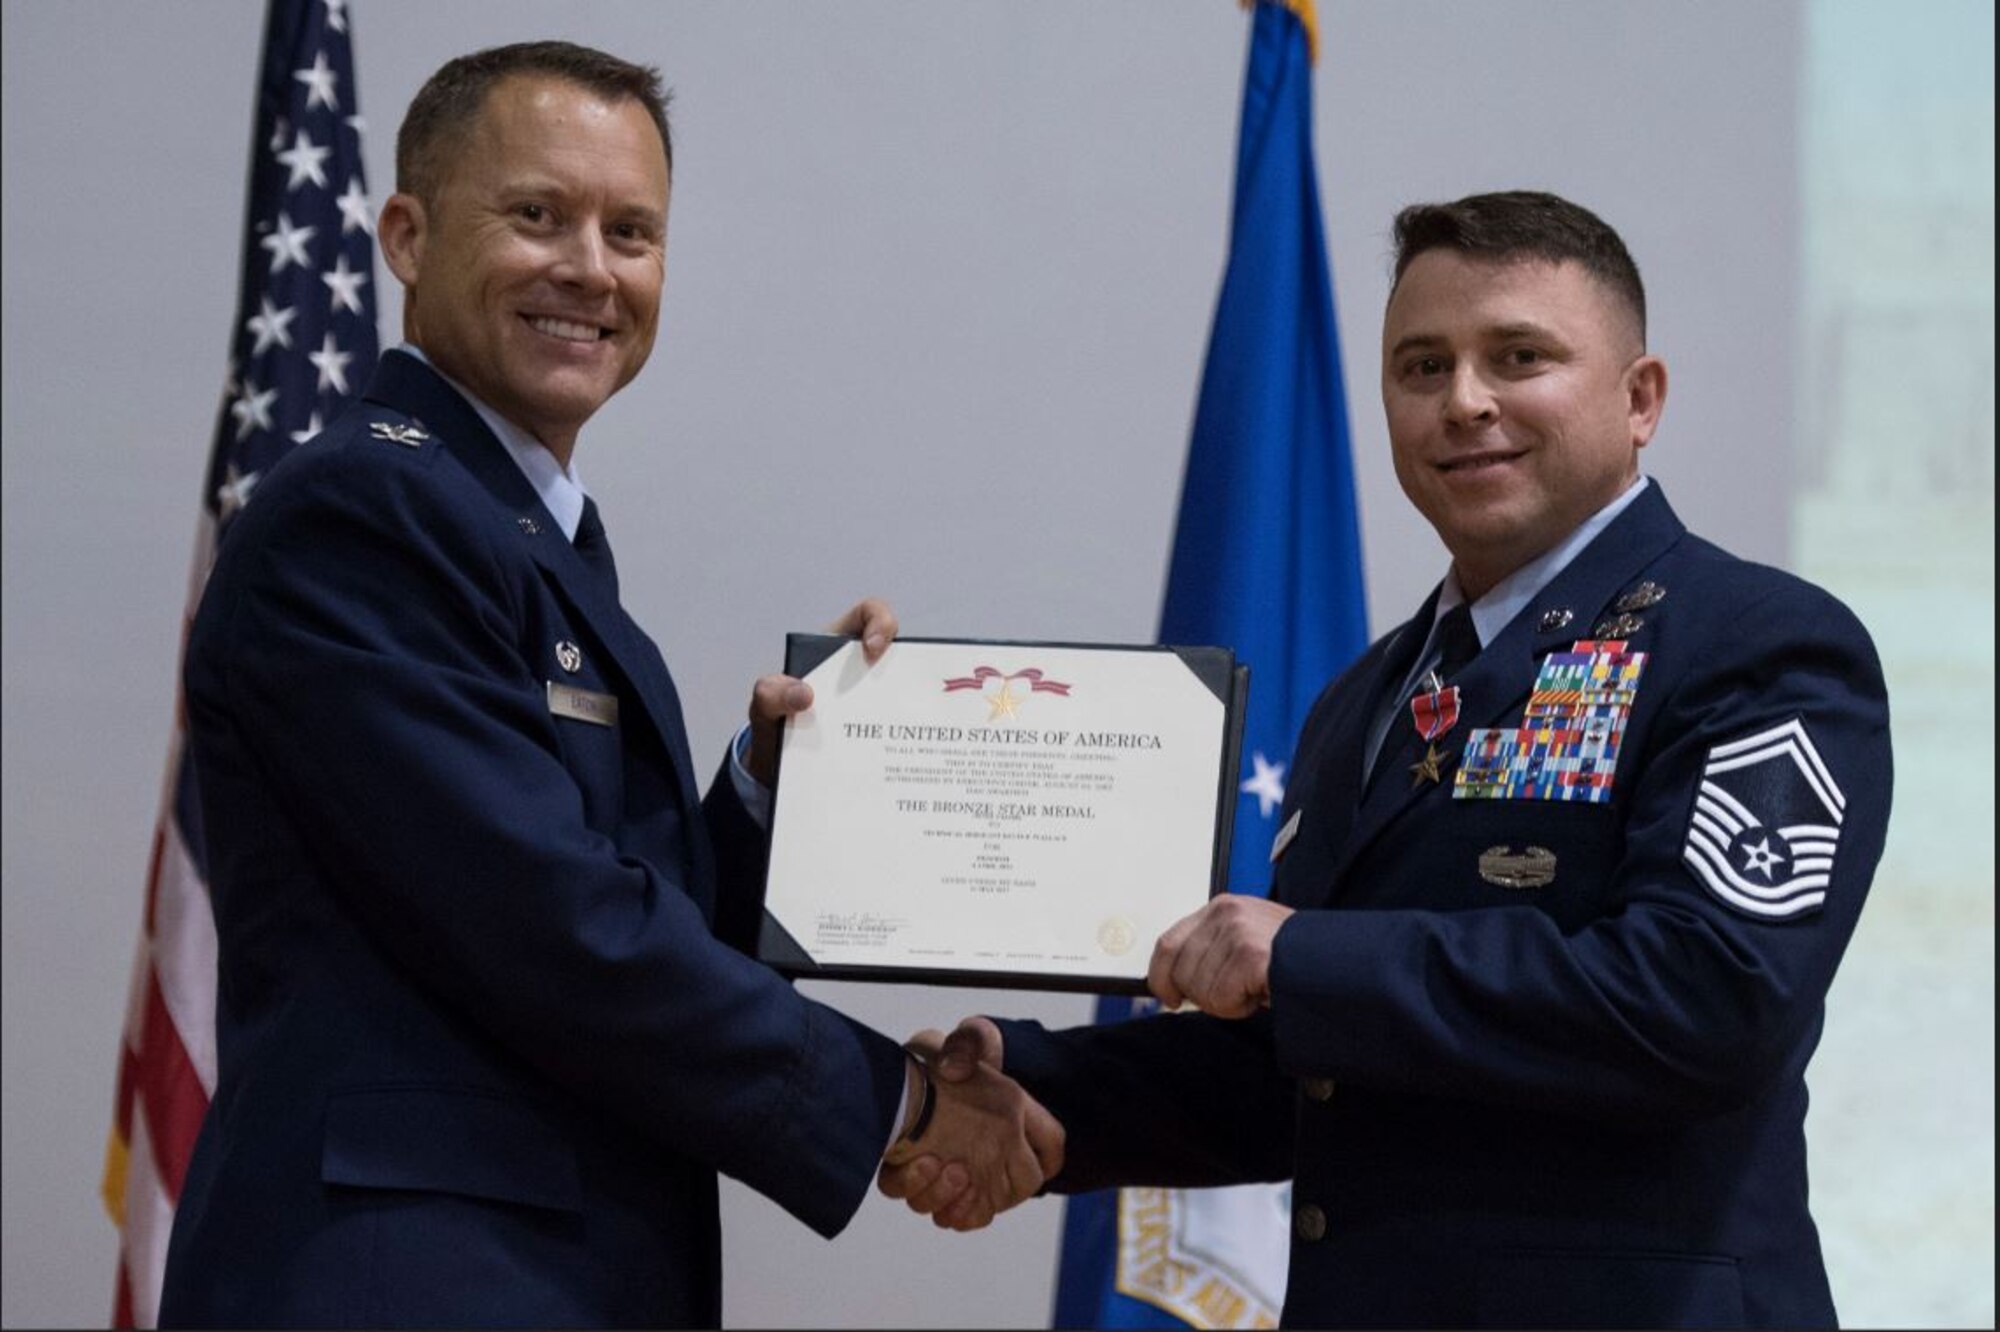 Col. Casey D. Eaton, left, then-89th Airlift Wing commander, awards Senior Master Sgt. Kevin Wallace, then-89th AW public affairs chief, with a Bronze Star with Valor medal at Joint Base Andrews, Md., Aug. 15, 2017. Wallace was awarded the medal for his distinguished heroism on April 4, 2011, as a 4th Infantry Division combat photographer. Wallace, a retired senior master sergeant, shared his personal story of resilience with the Hanscom community during a virtual Suicide Prevention Month Storytellers event Sept. 22. (U.S. Air Force photo by Airman 1st Class Valentina Lopez)